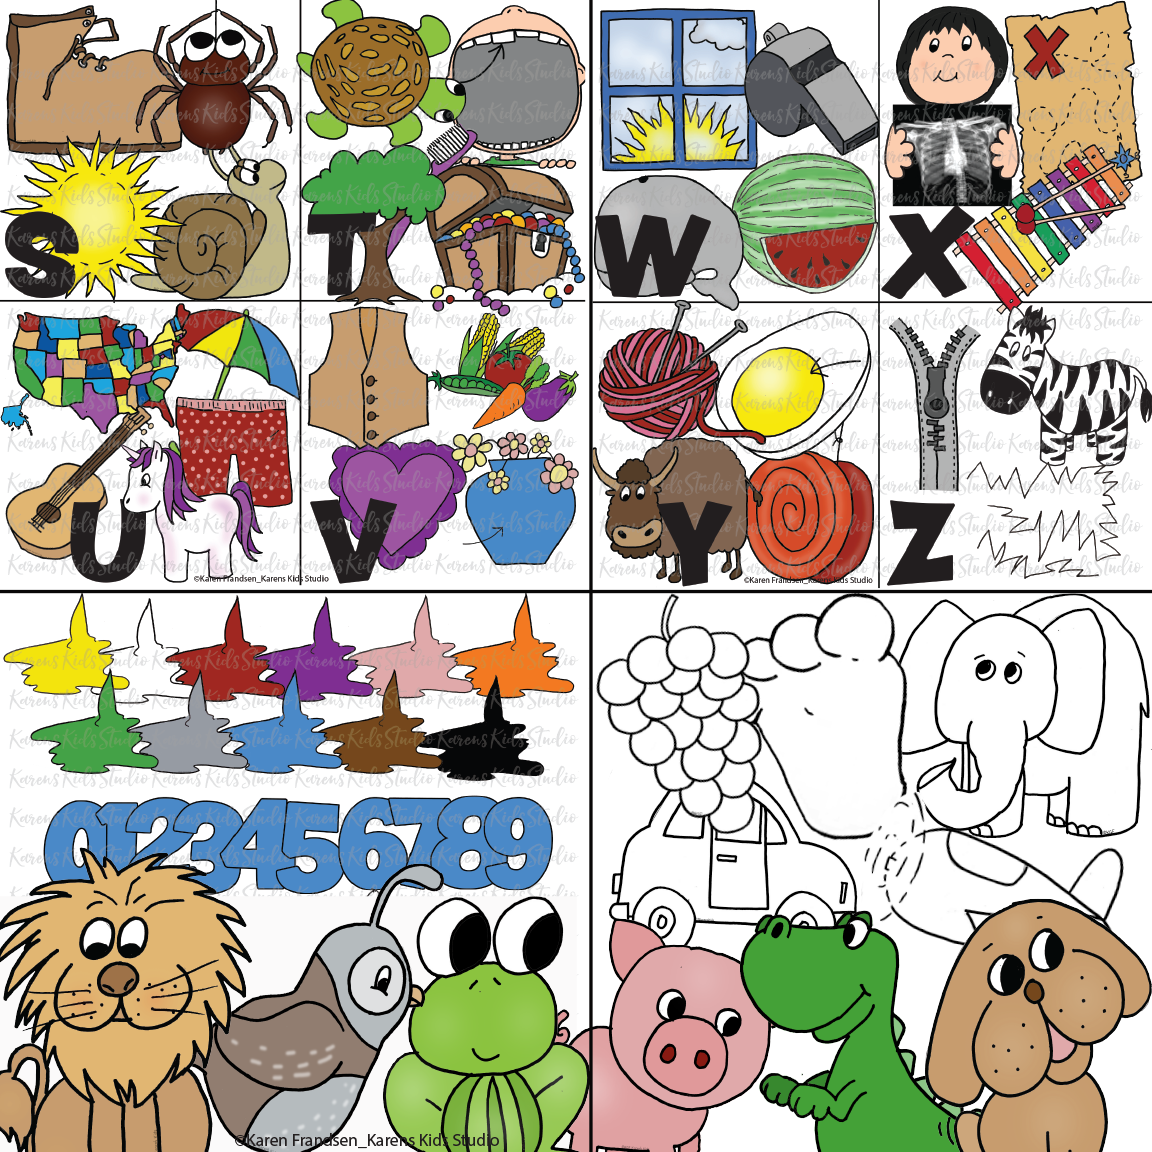 Colorful alphabet pictures with 4-7 pictures per letter.